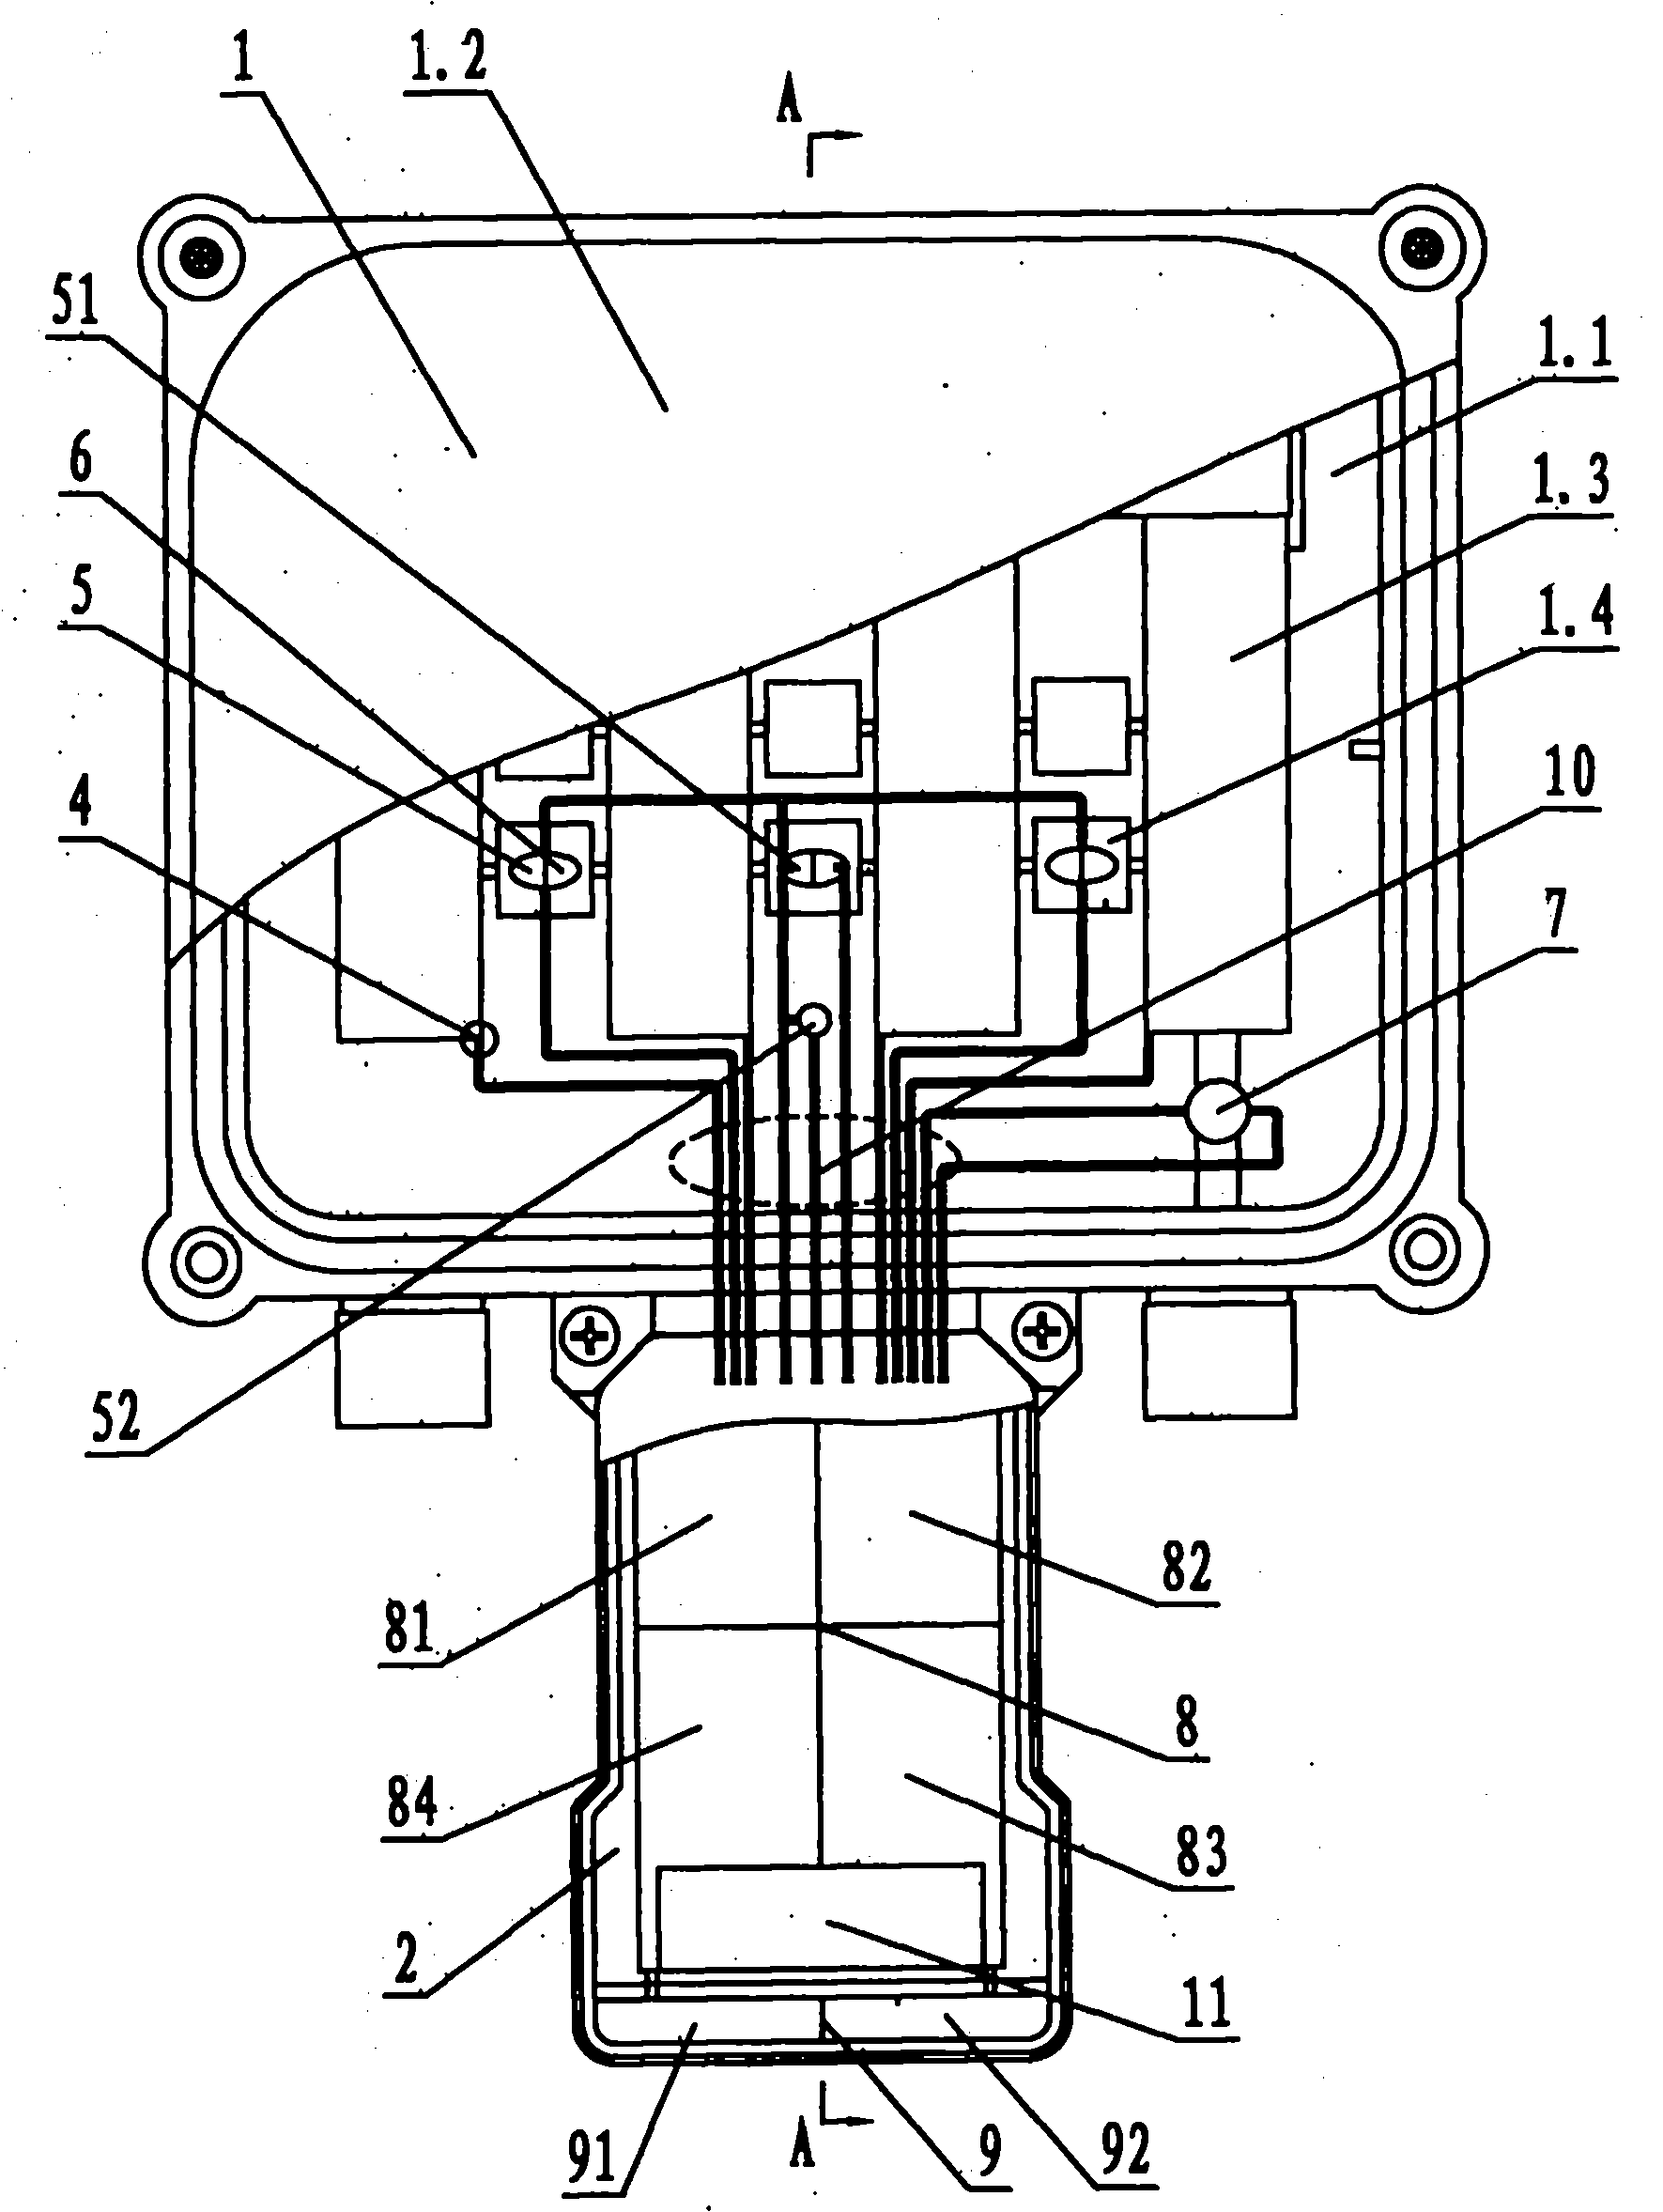 Monitoring method of junction box for photovoltaic module